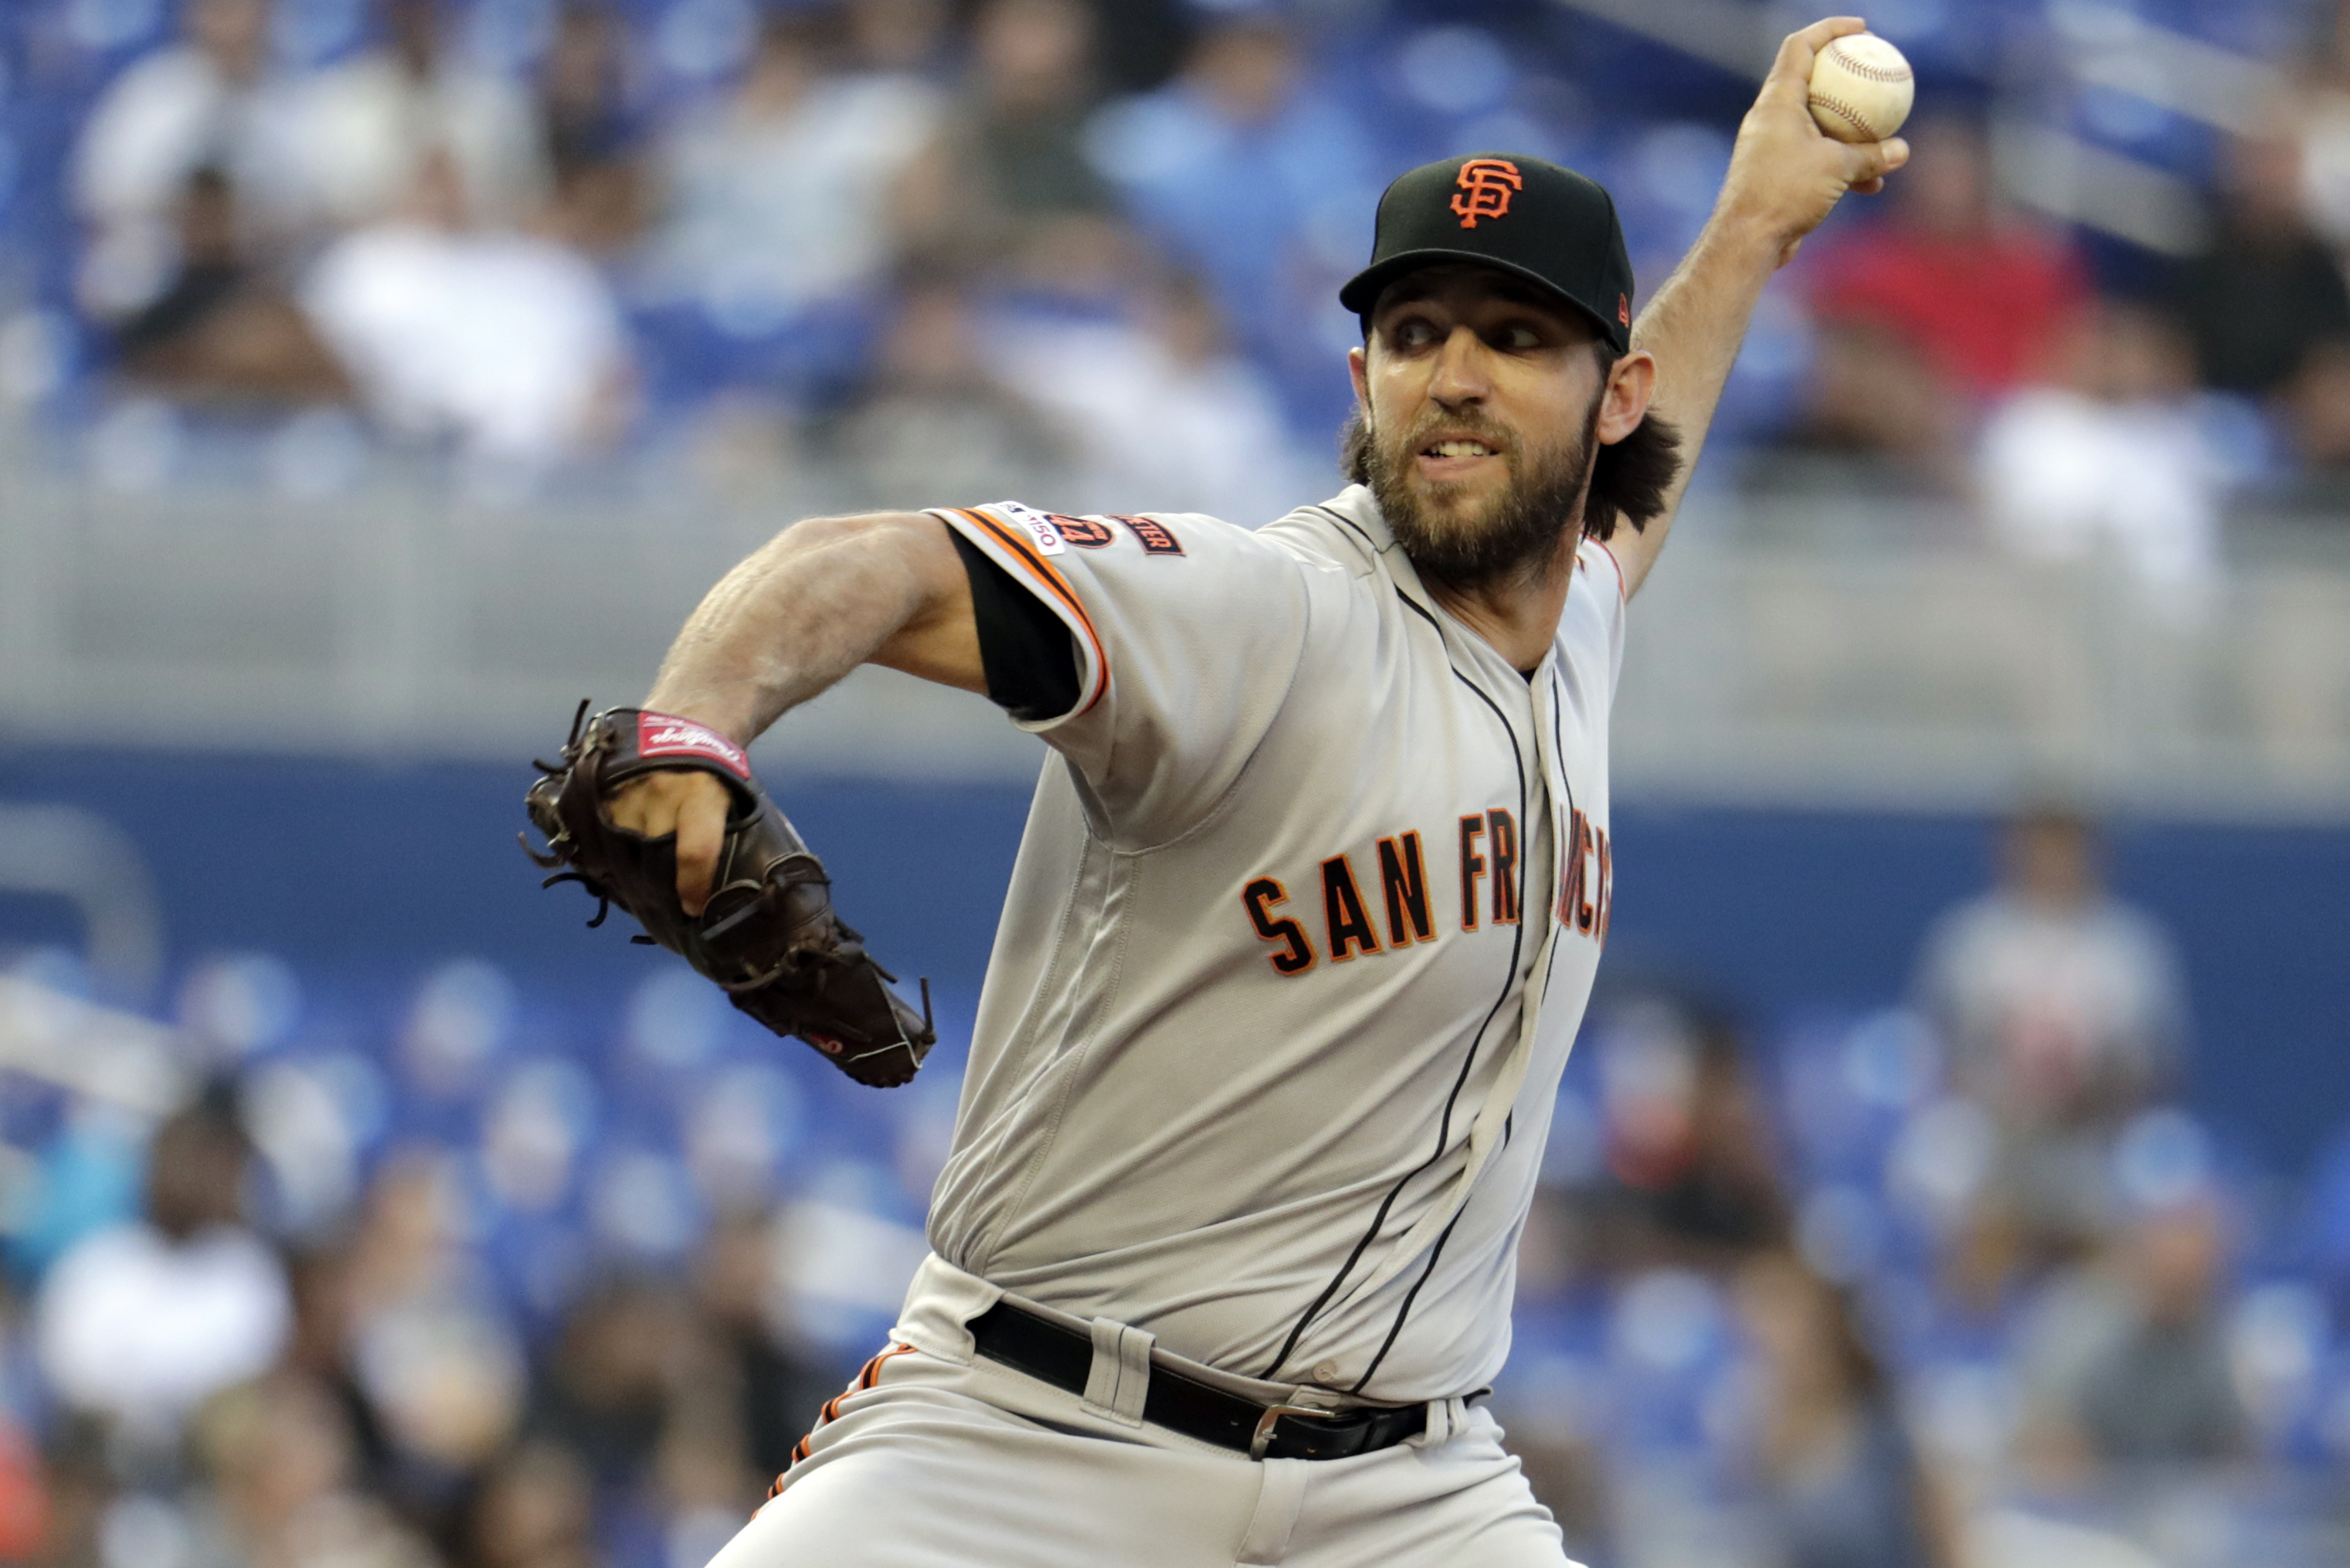 Can Giants' Madison Bumgarner regain a tick or two with velocity?